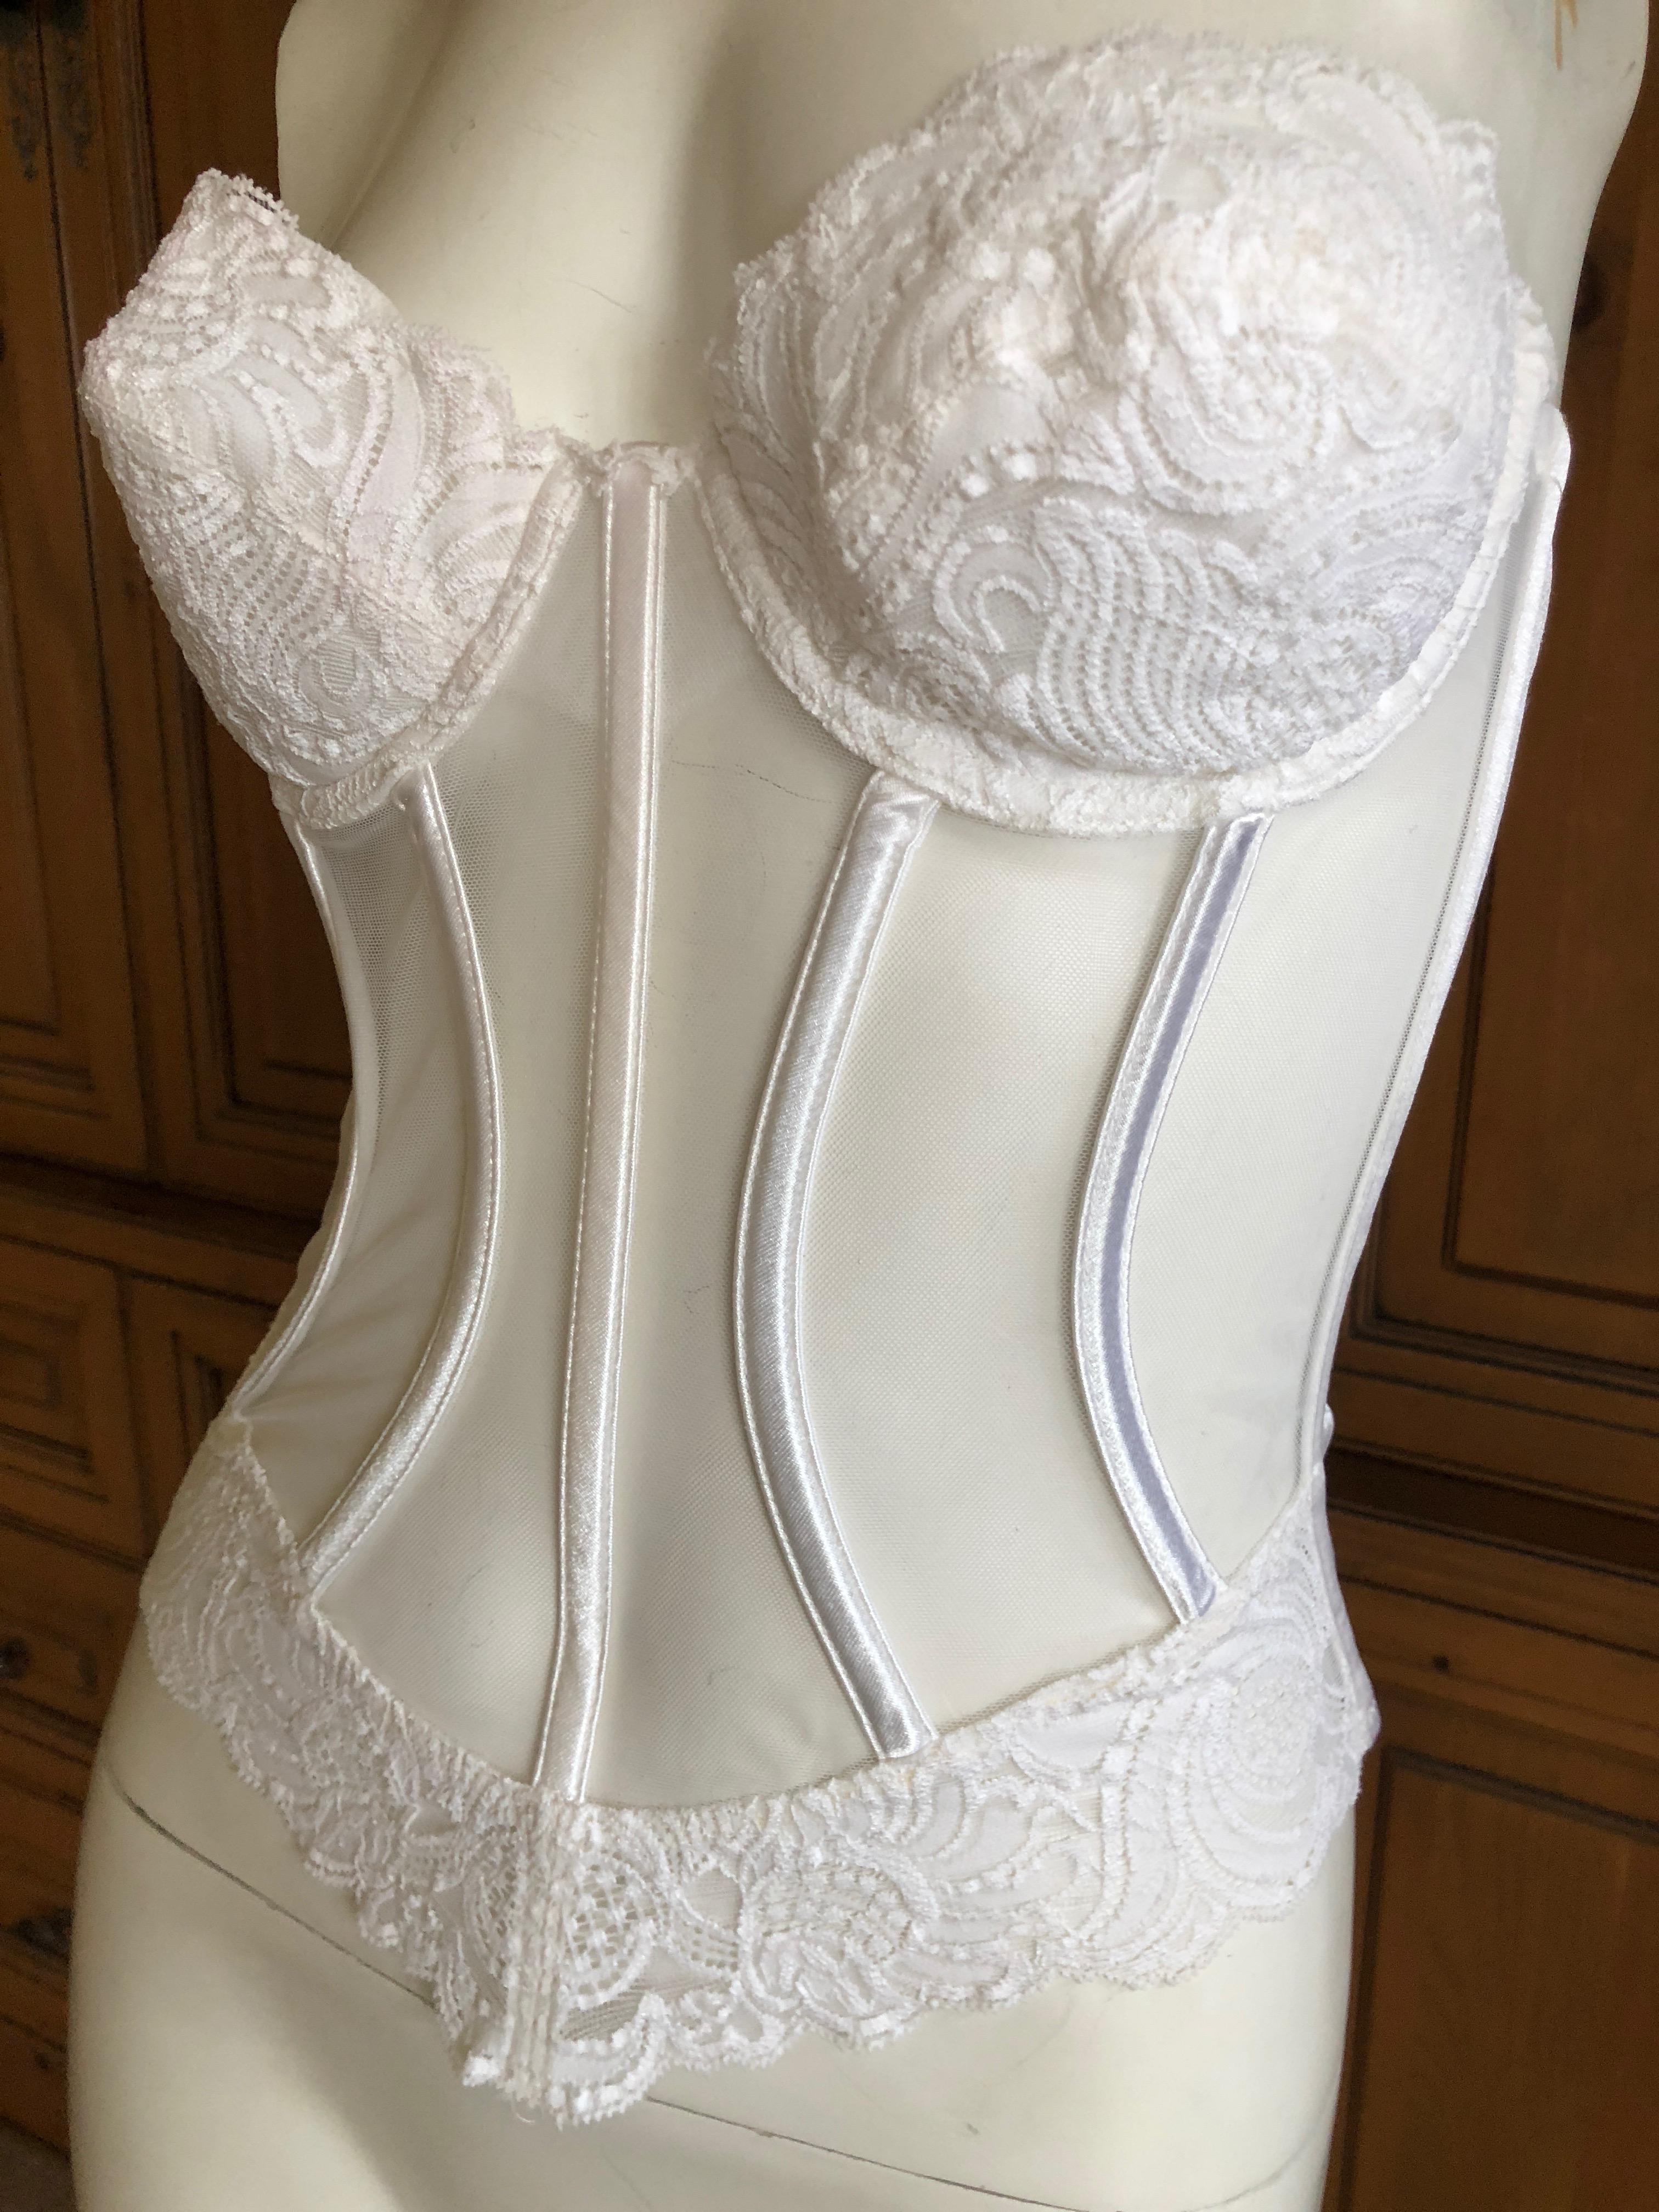 Christian Dior Vintage White Lace Lingerie Corset 34C In Excellent Condition For Sale In Cloverdale, CA